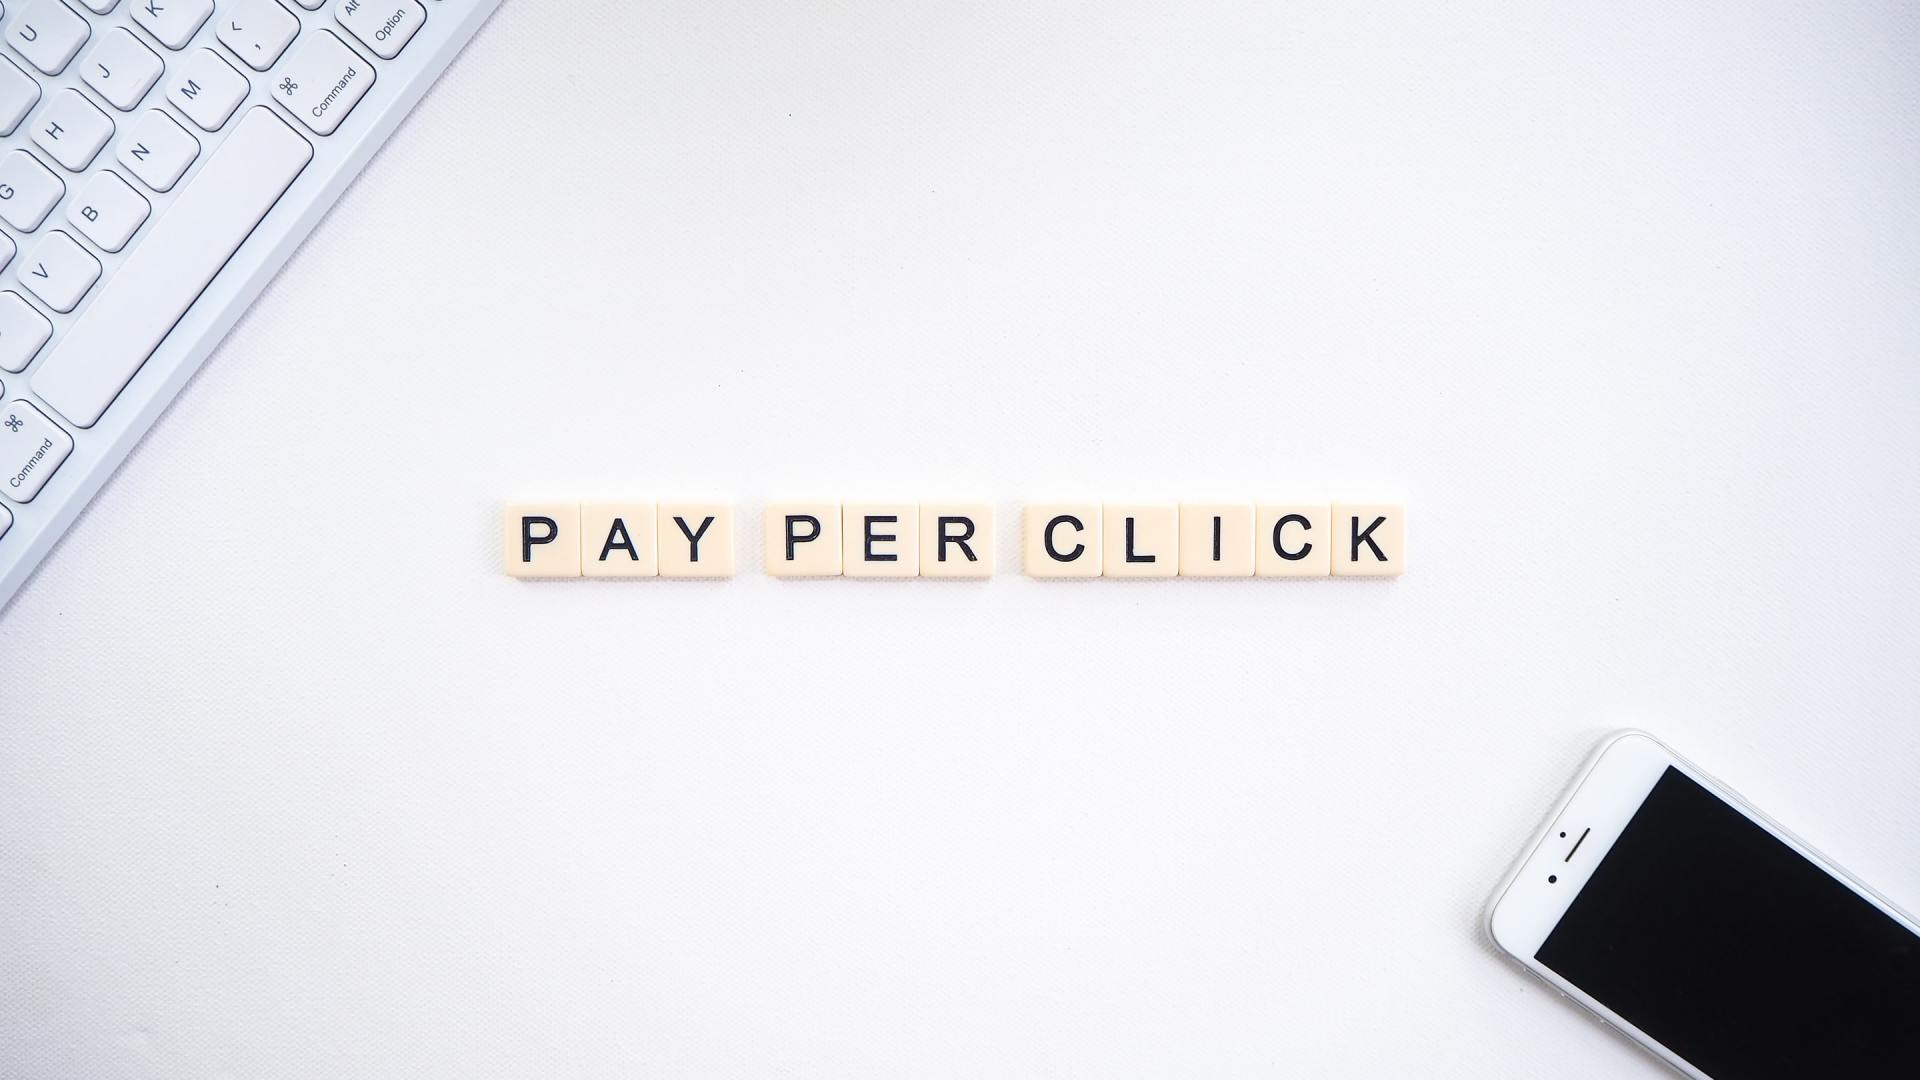 You don’t pay if they don’t click